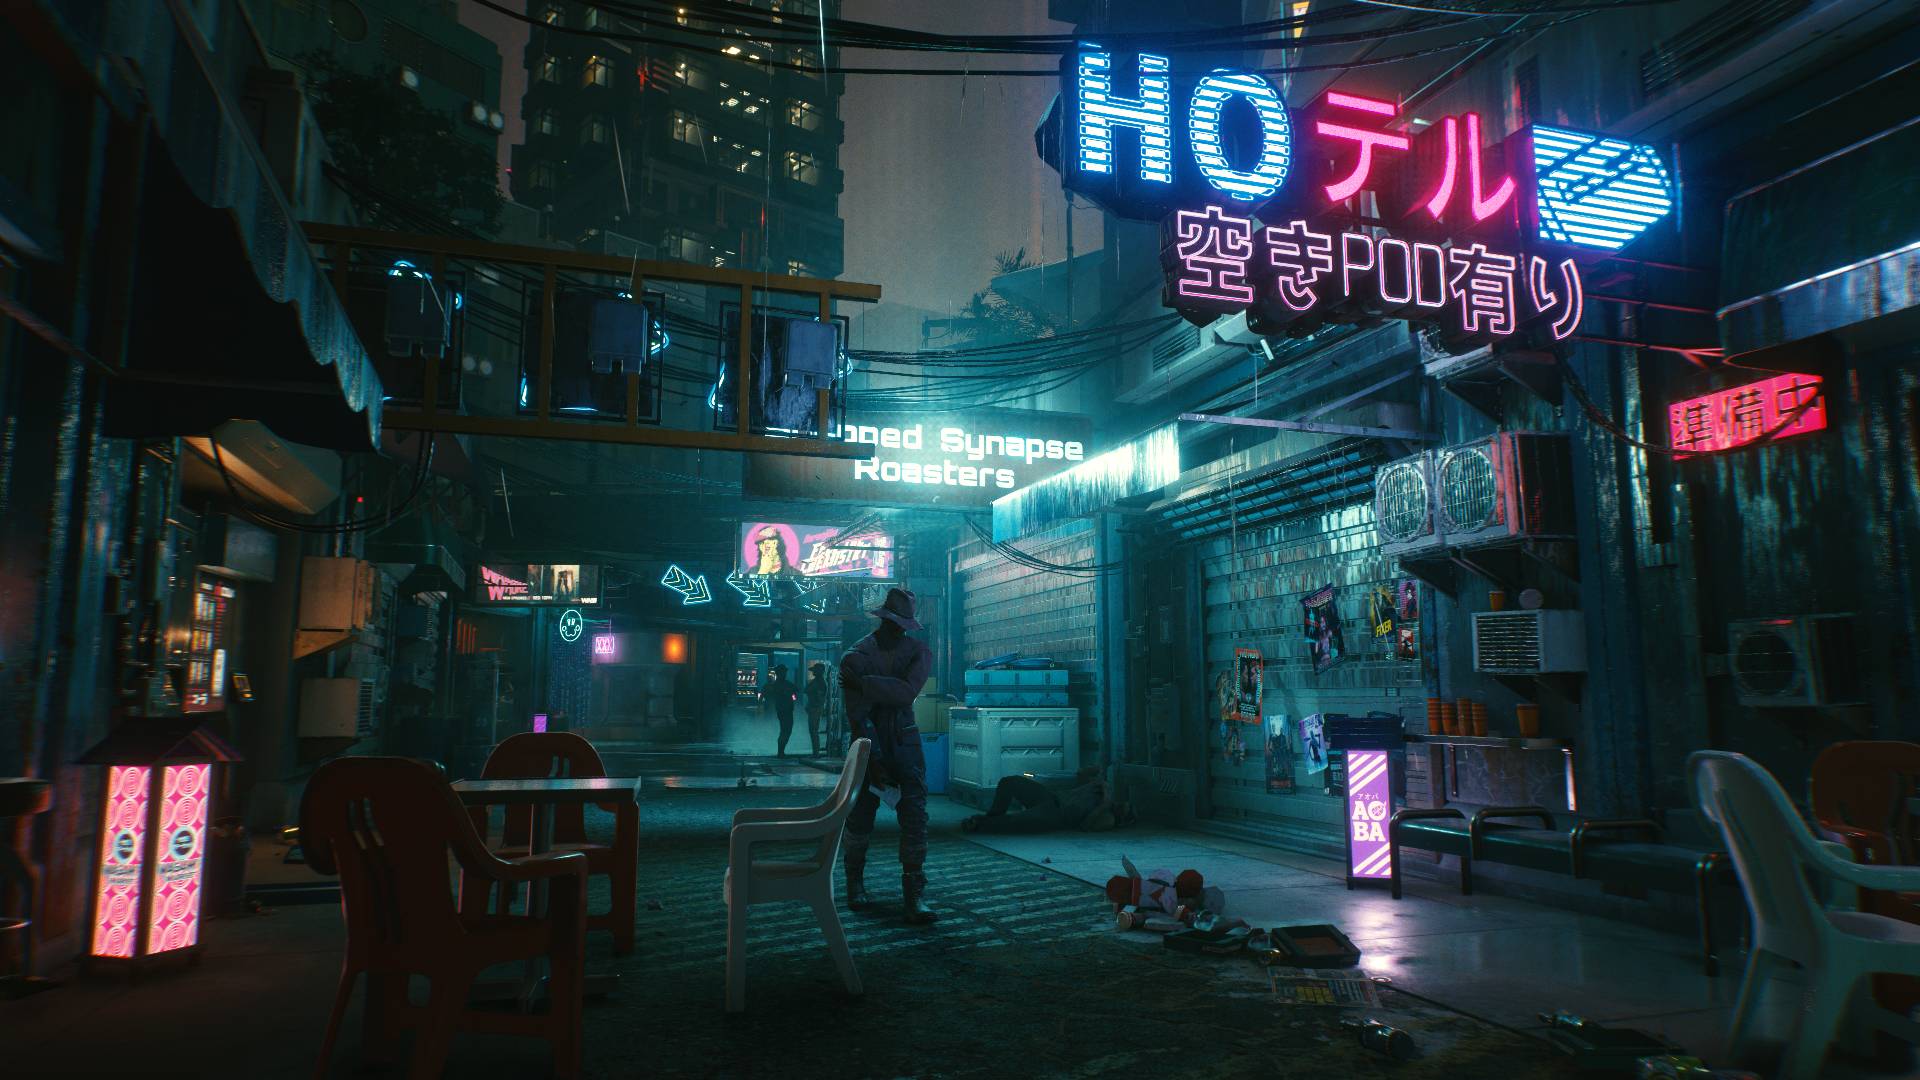 We Go Hands On With Cyberpunk 2077 The Hype Real?